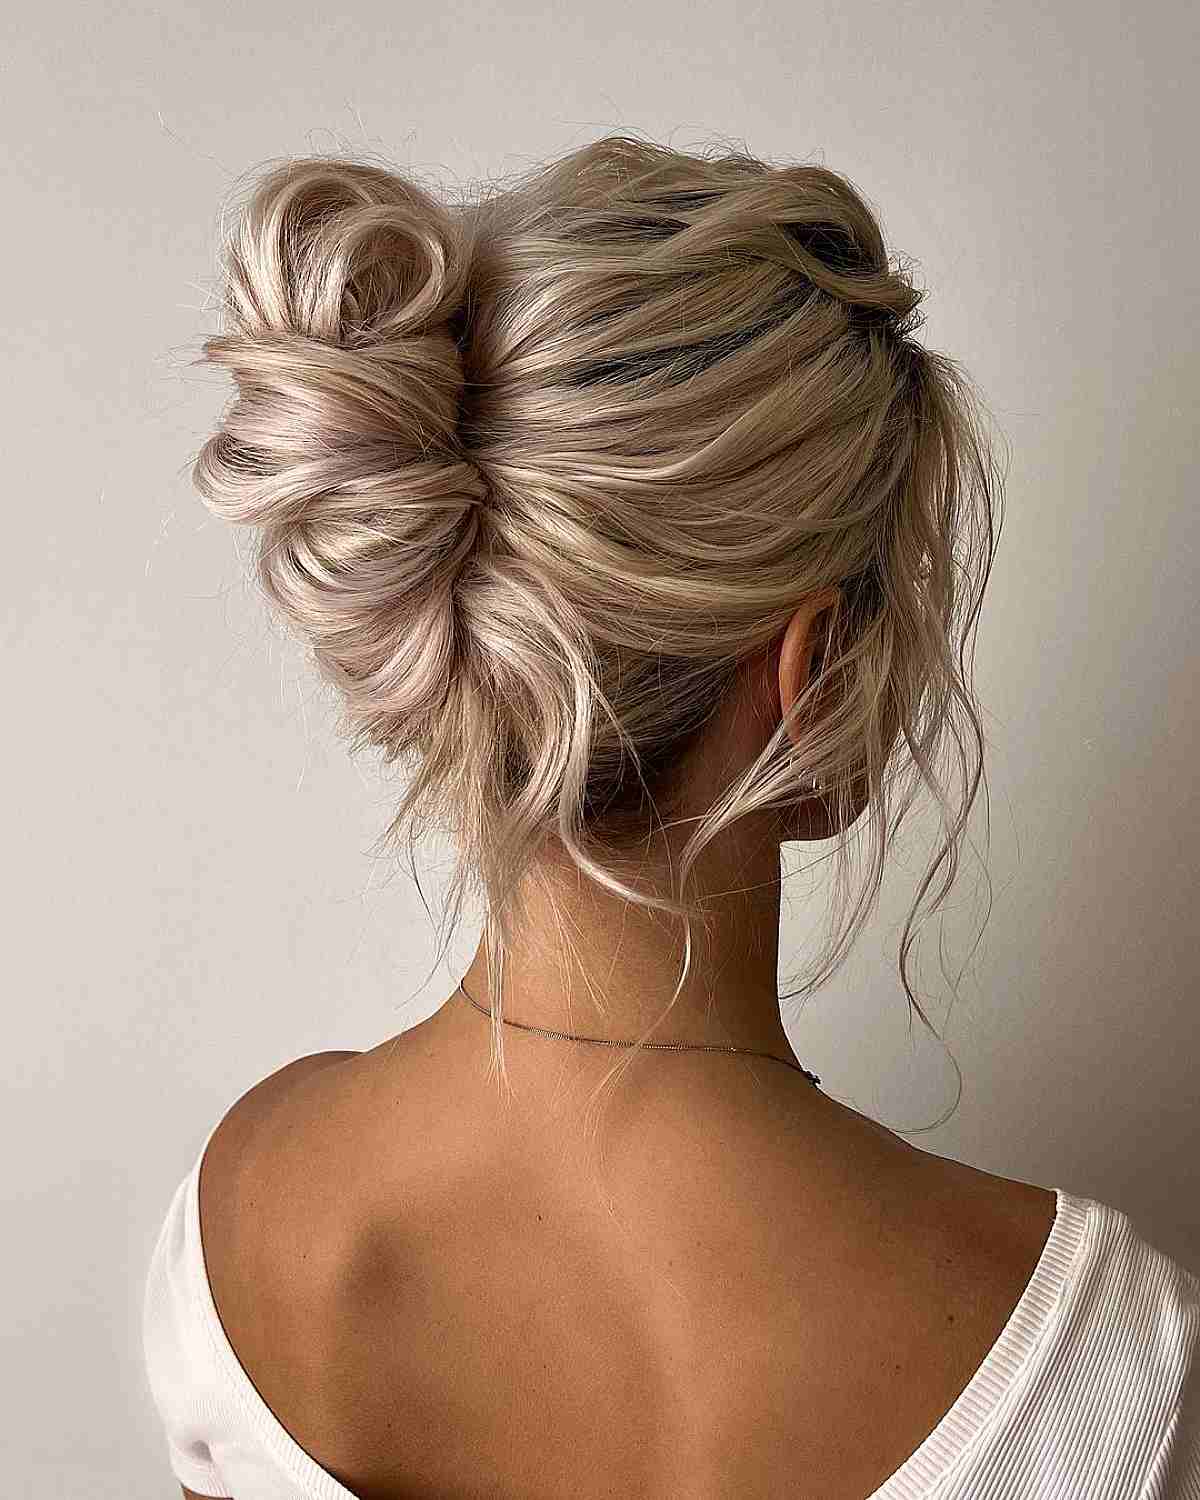 13 Stylish Updos For Long Hair With Step-By-Step Tutorials